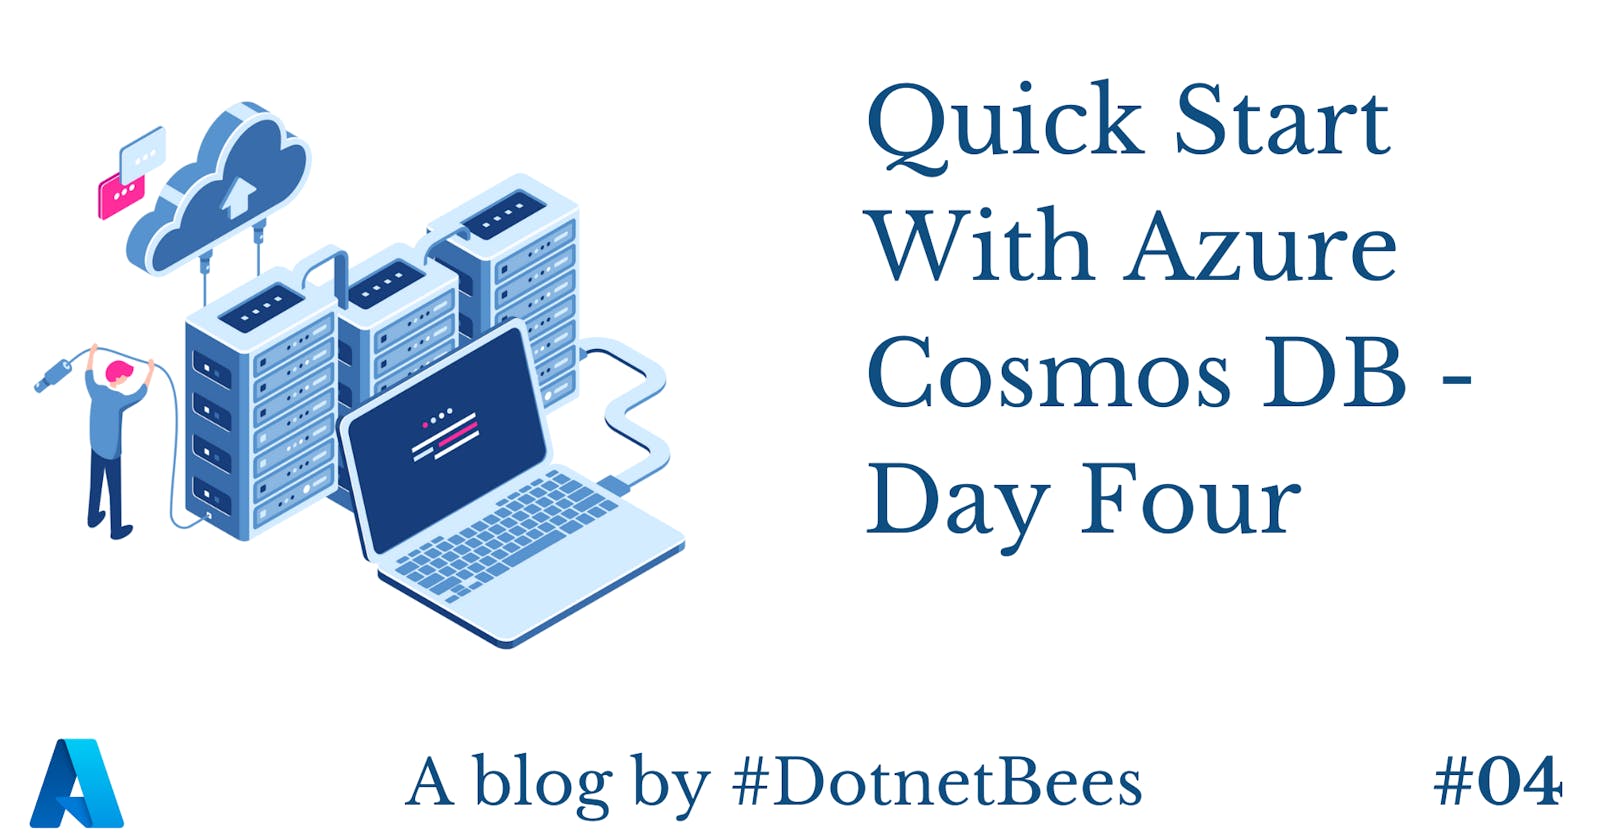 Quick Start With Azure Cosmos DB - Day Four